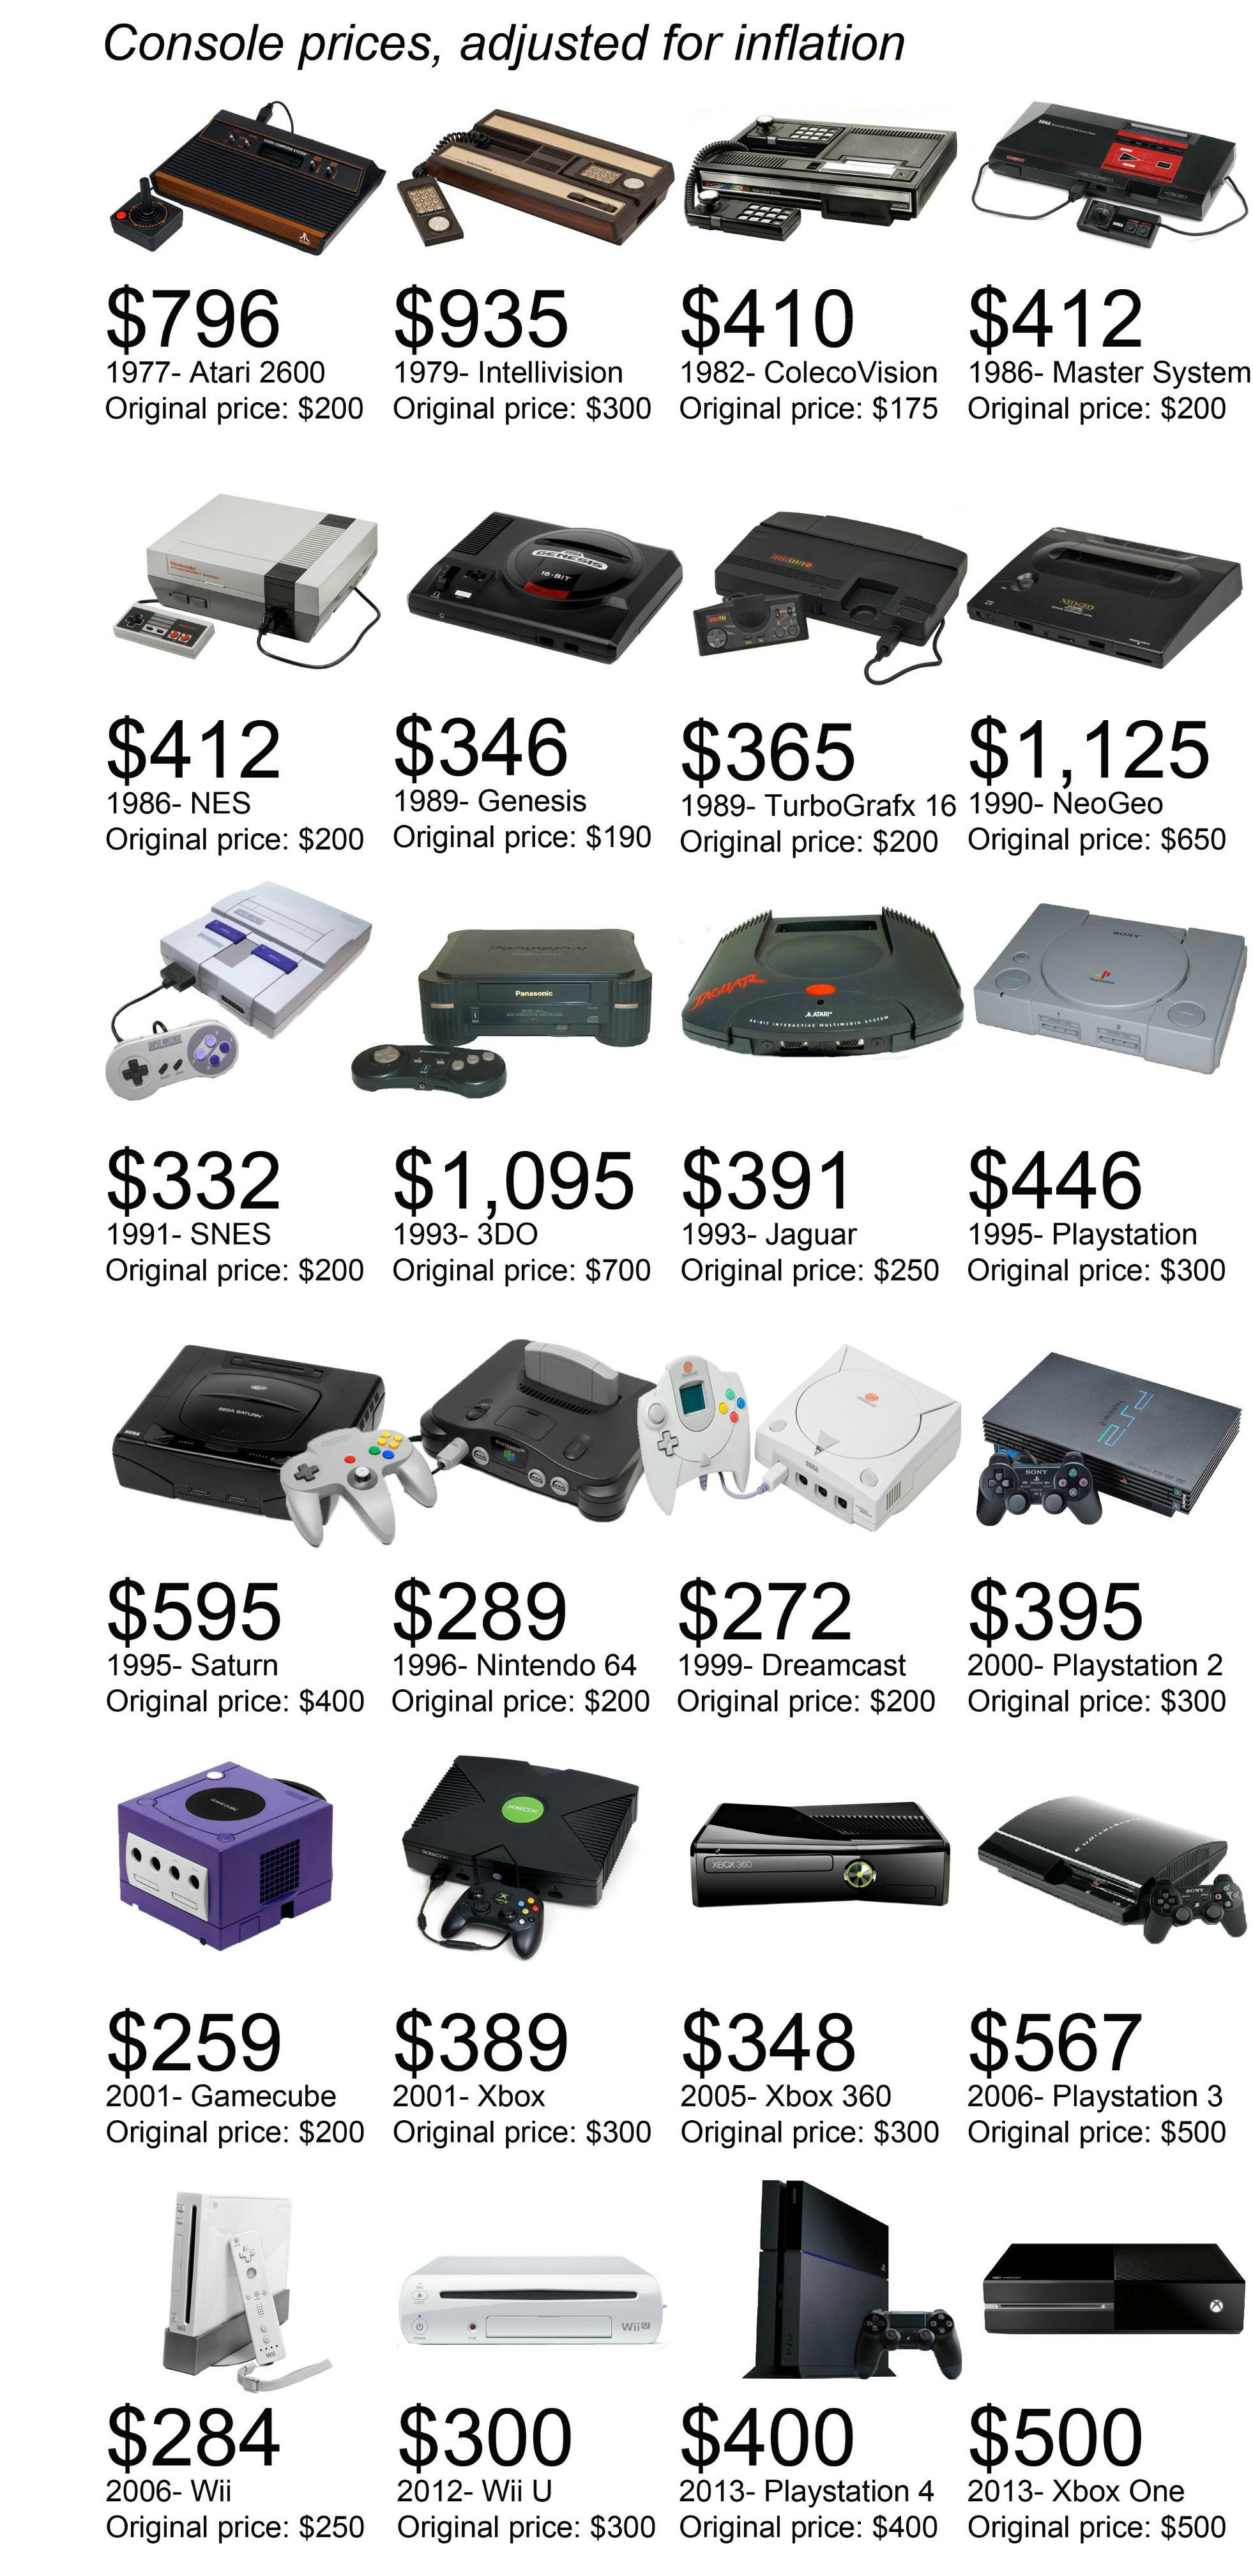 Console Price Inflation